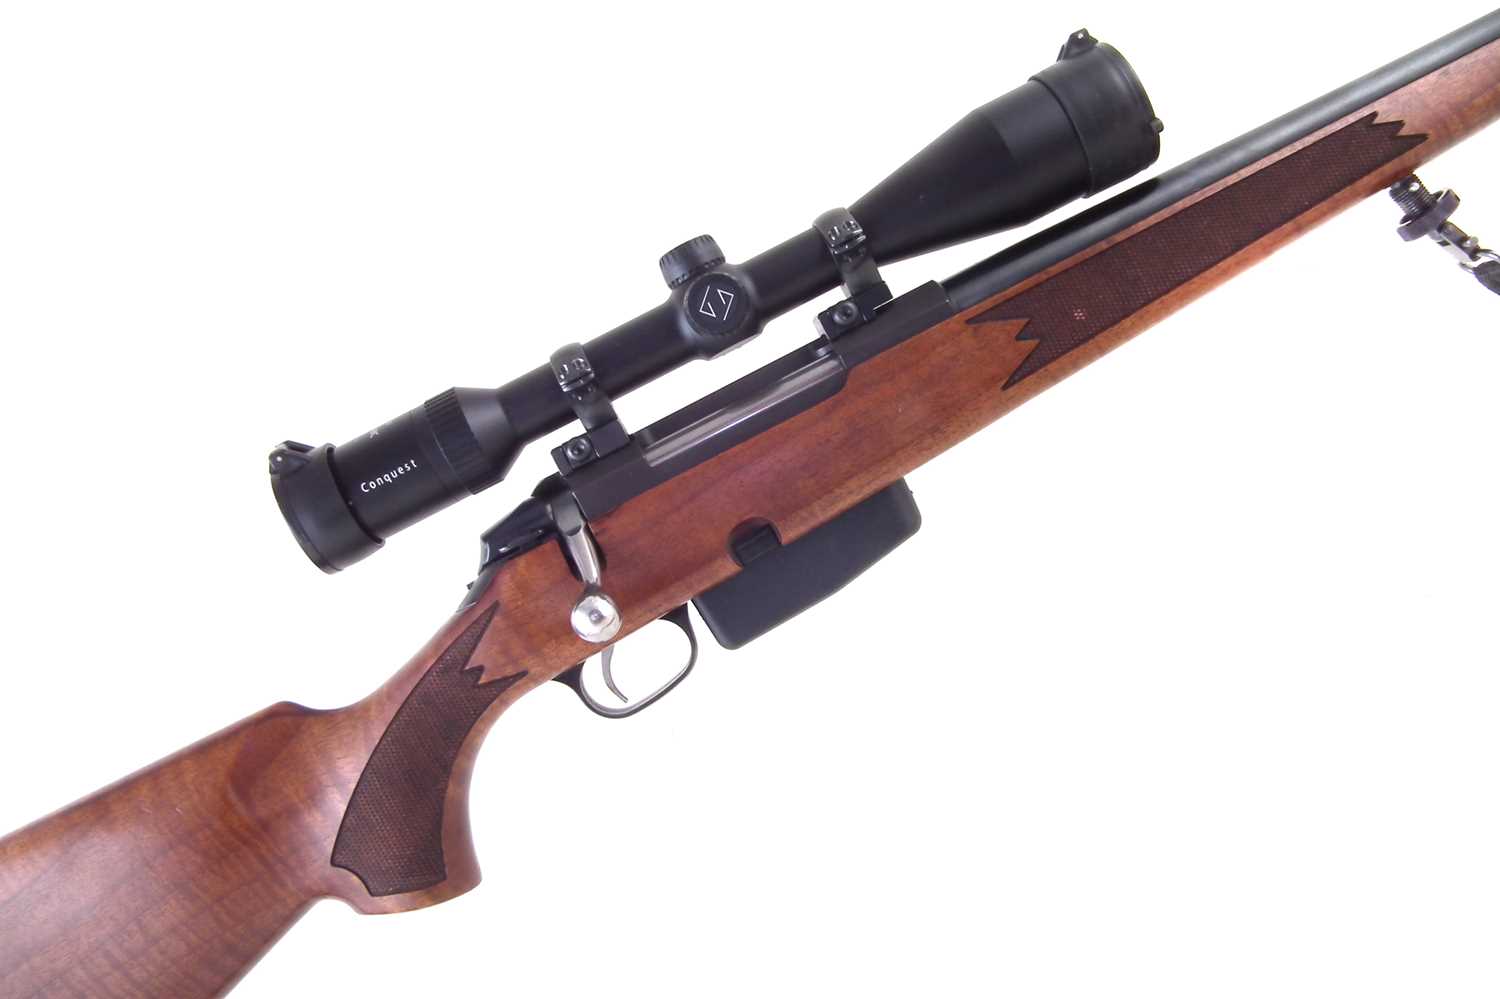 Lot 56 - Tikka M695 6.5 x 55 bolt action rifle with Zeiss scope